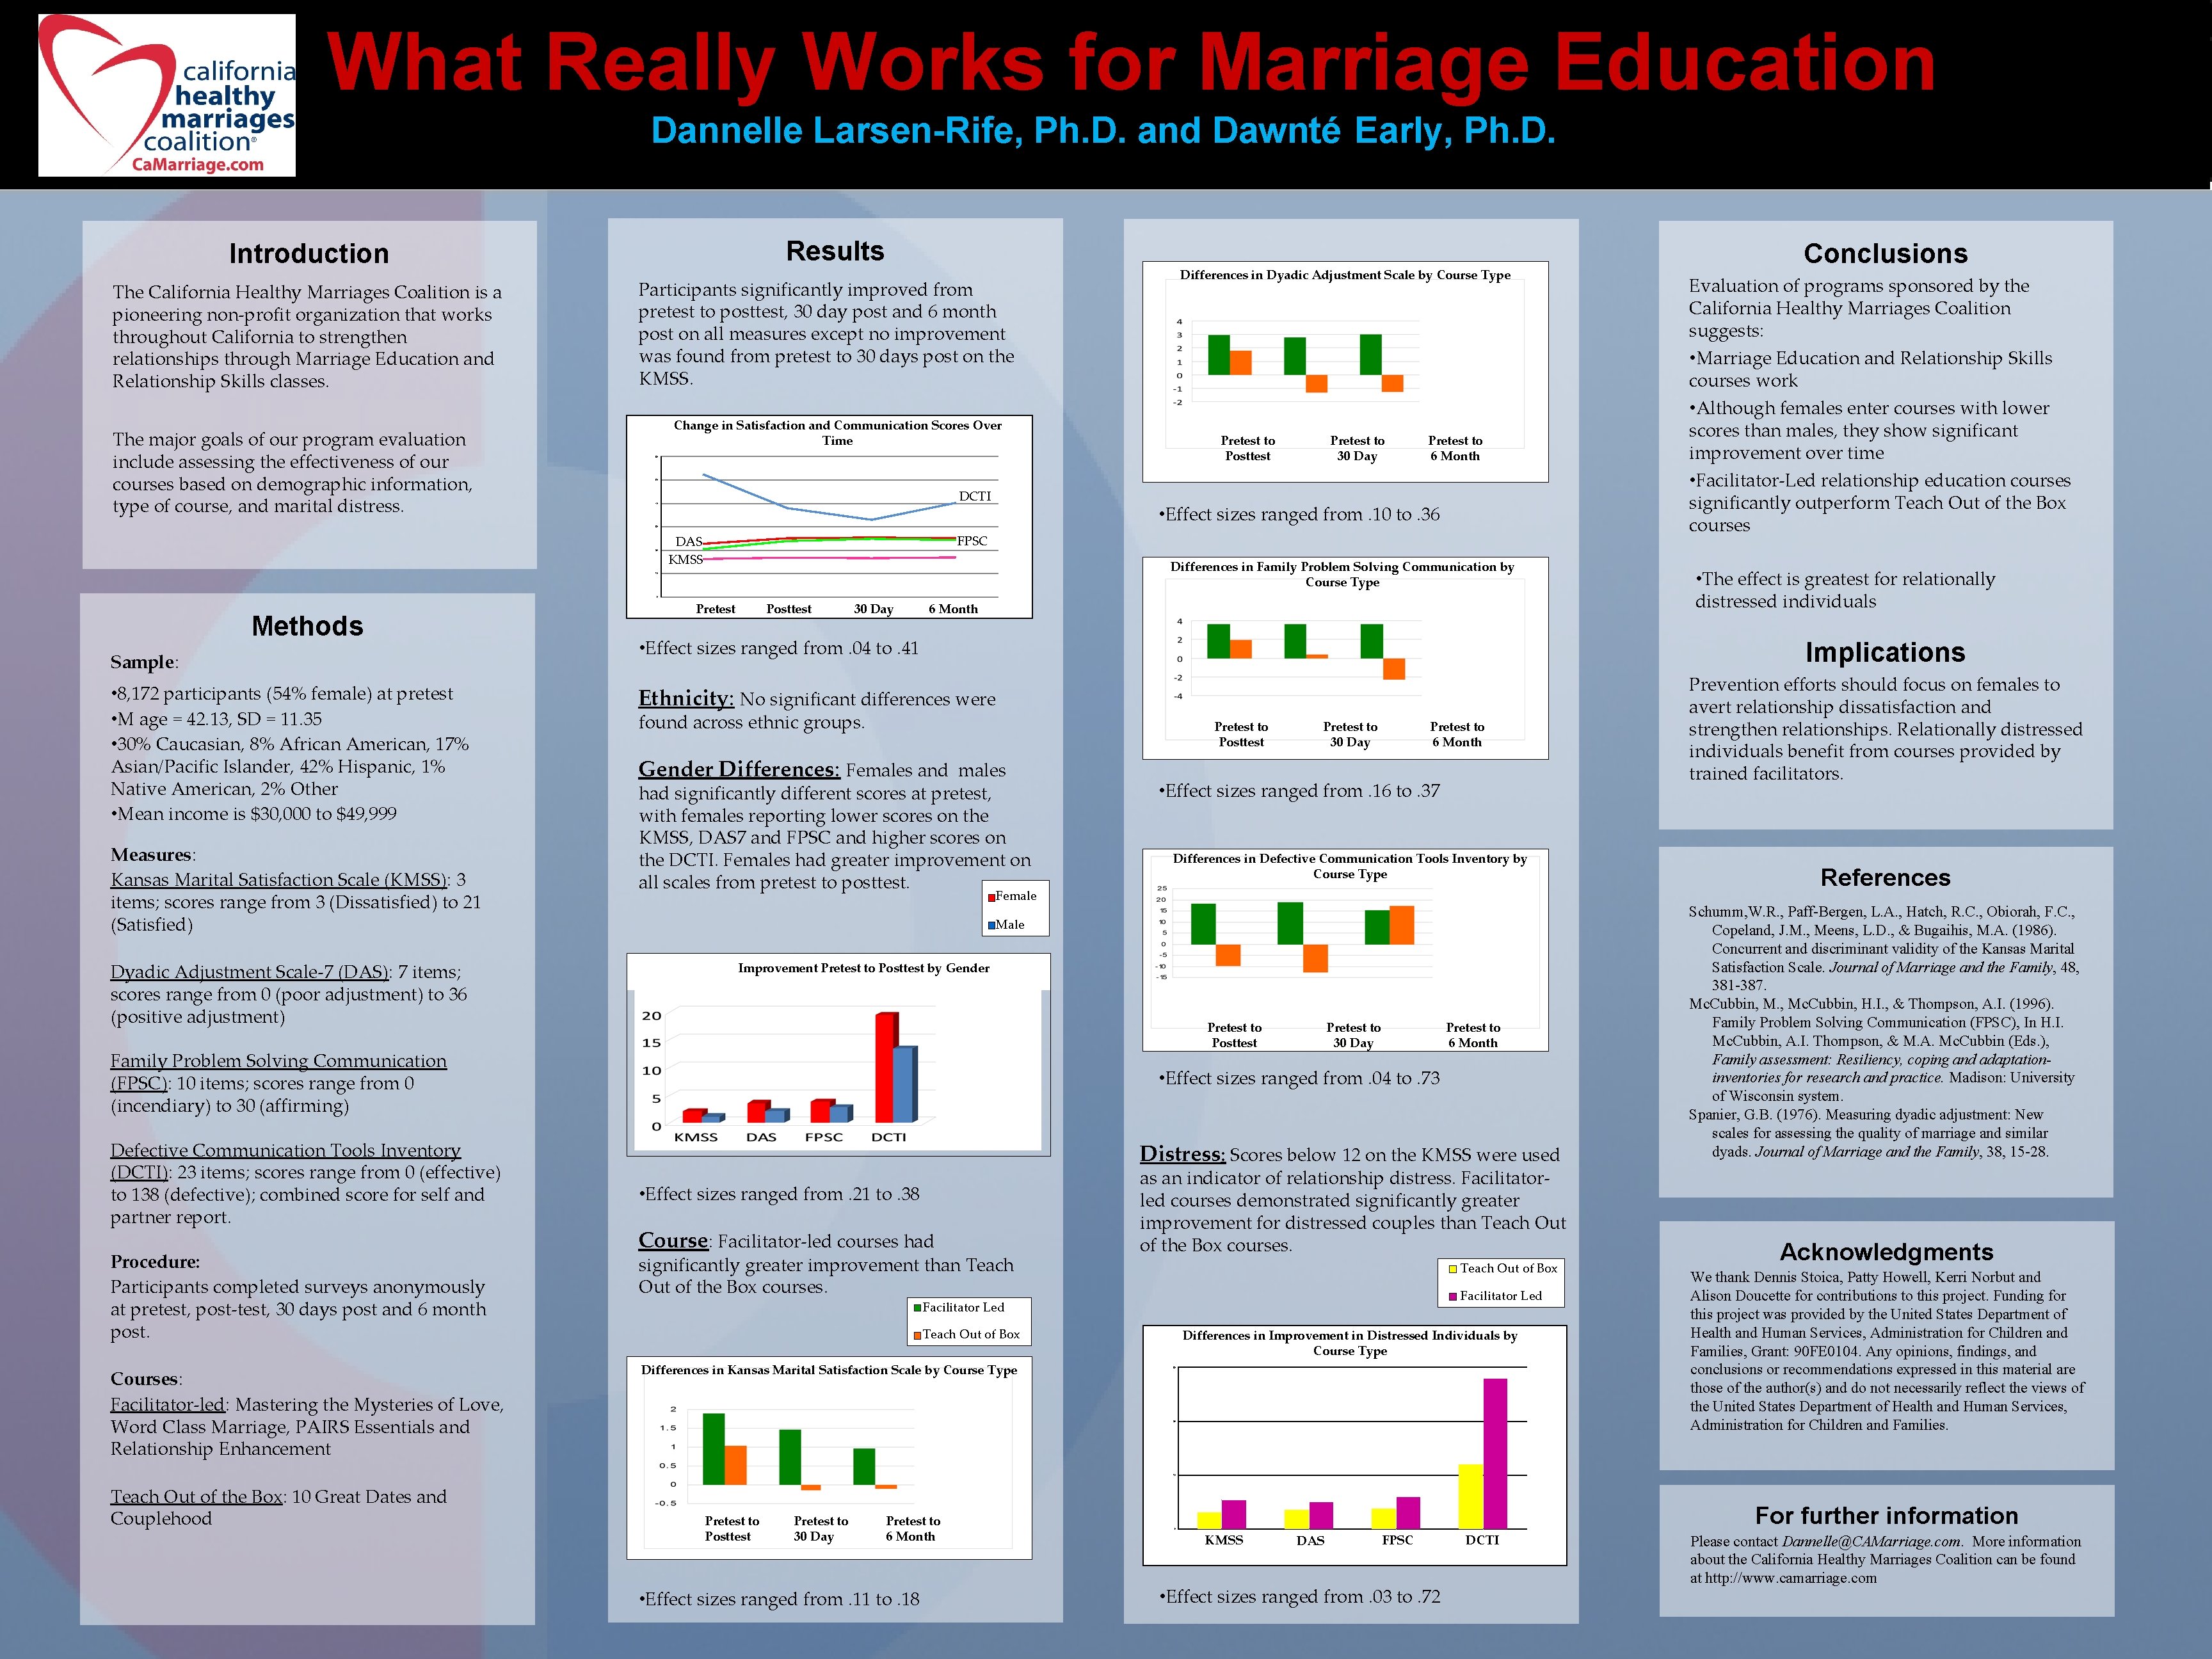 What Really Works for Marriage Education Dannelle Larsen-Rife, Ph. D. and Dawnté Early, Ph.